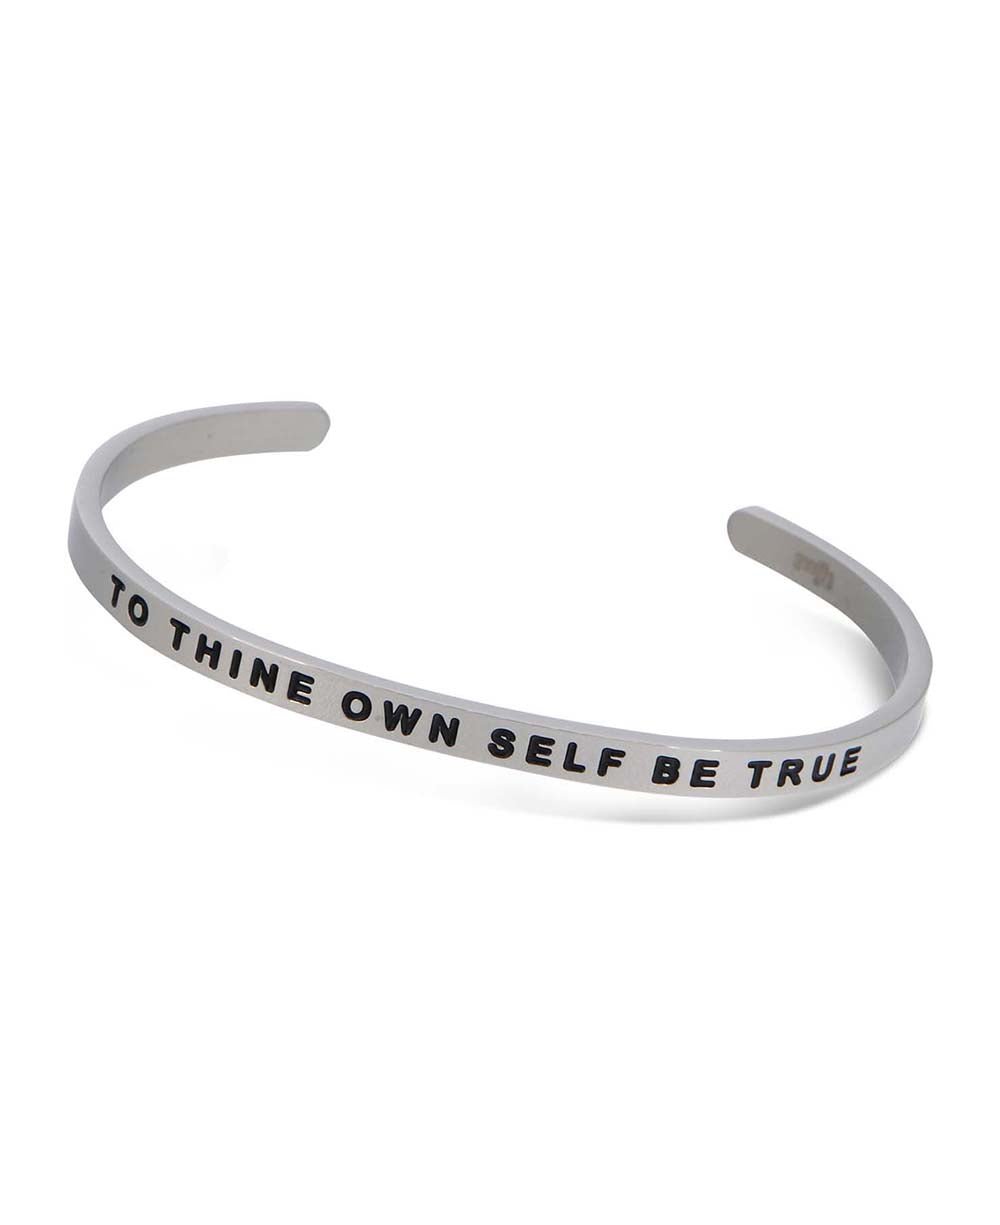 To Thine Own Self Be True, Inspirational Quote Bracelet - Bracelets